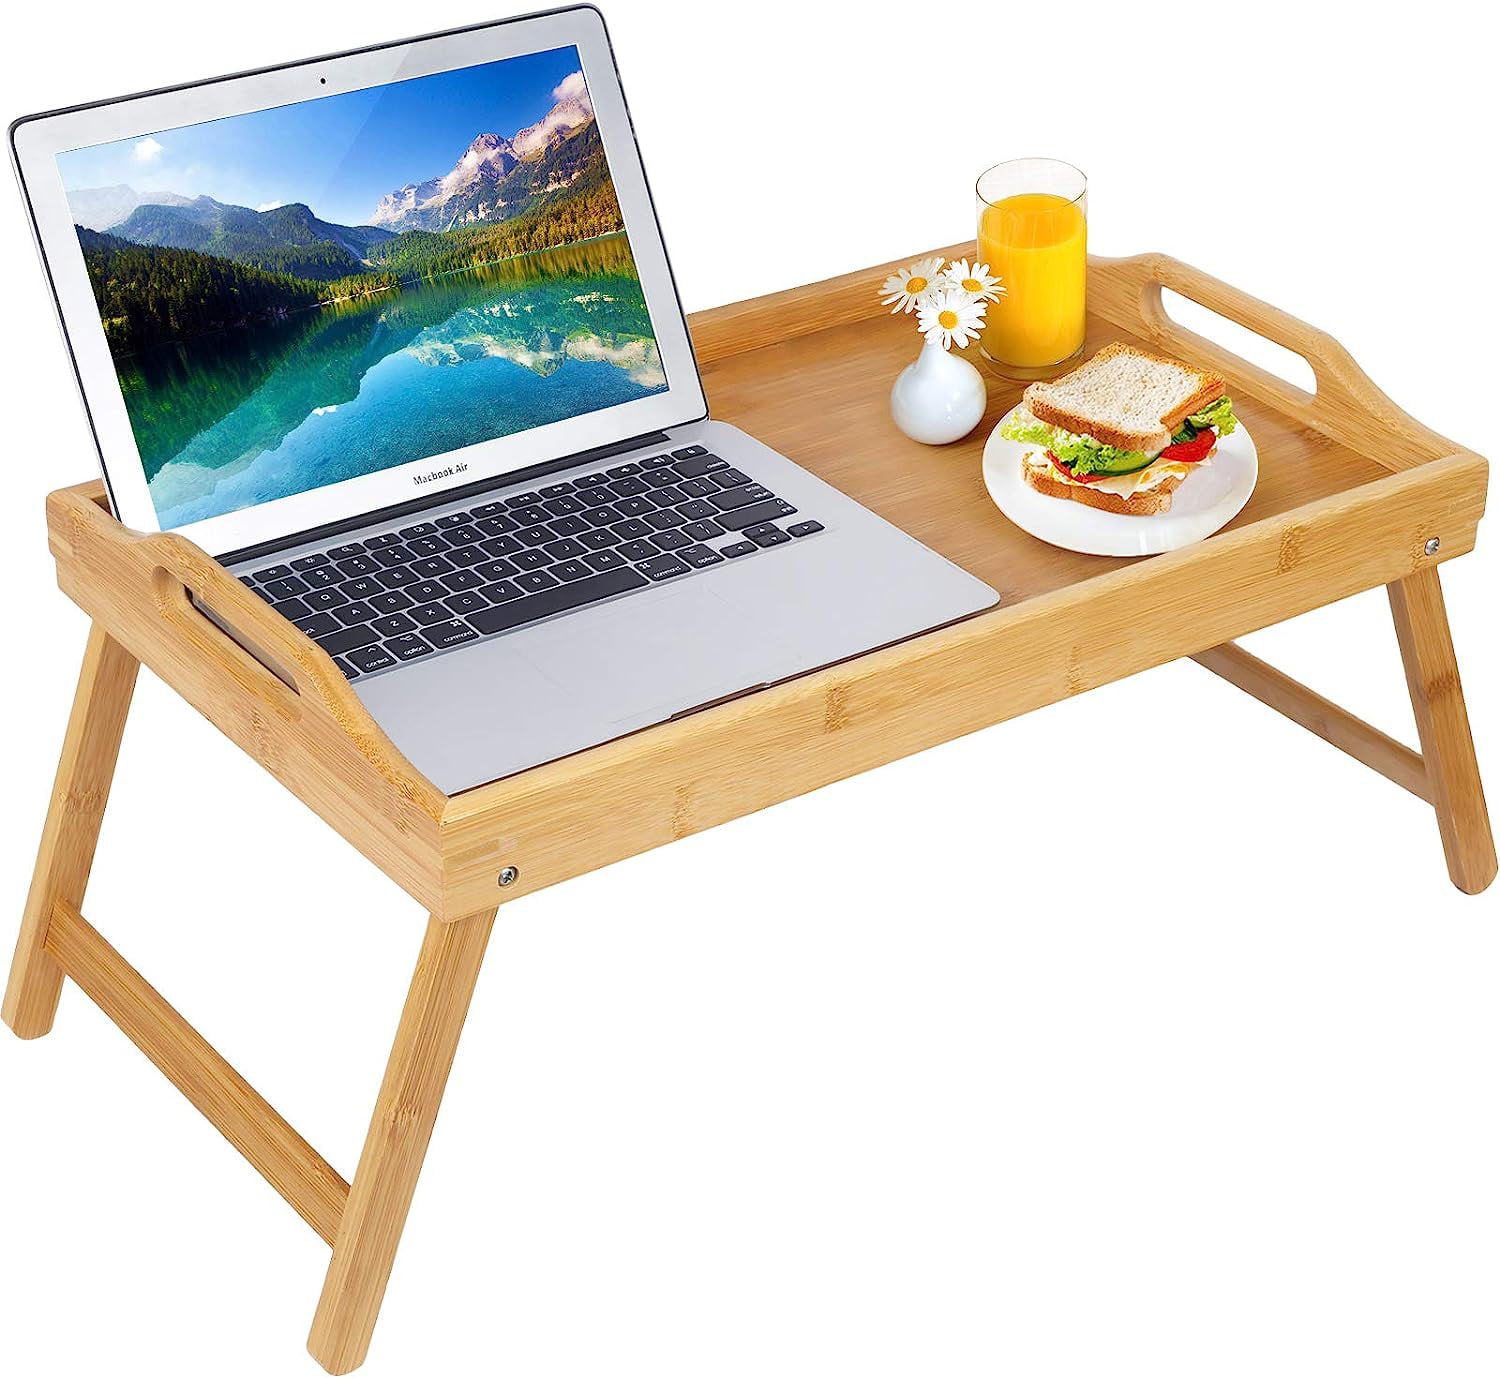 Breakfast in Bed Tray with Legs,Bed Trays Eating Table Lap Trays for Adults  Food Trays Eating On Bed, 20 Inch Removable Media Sl